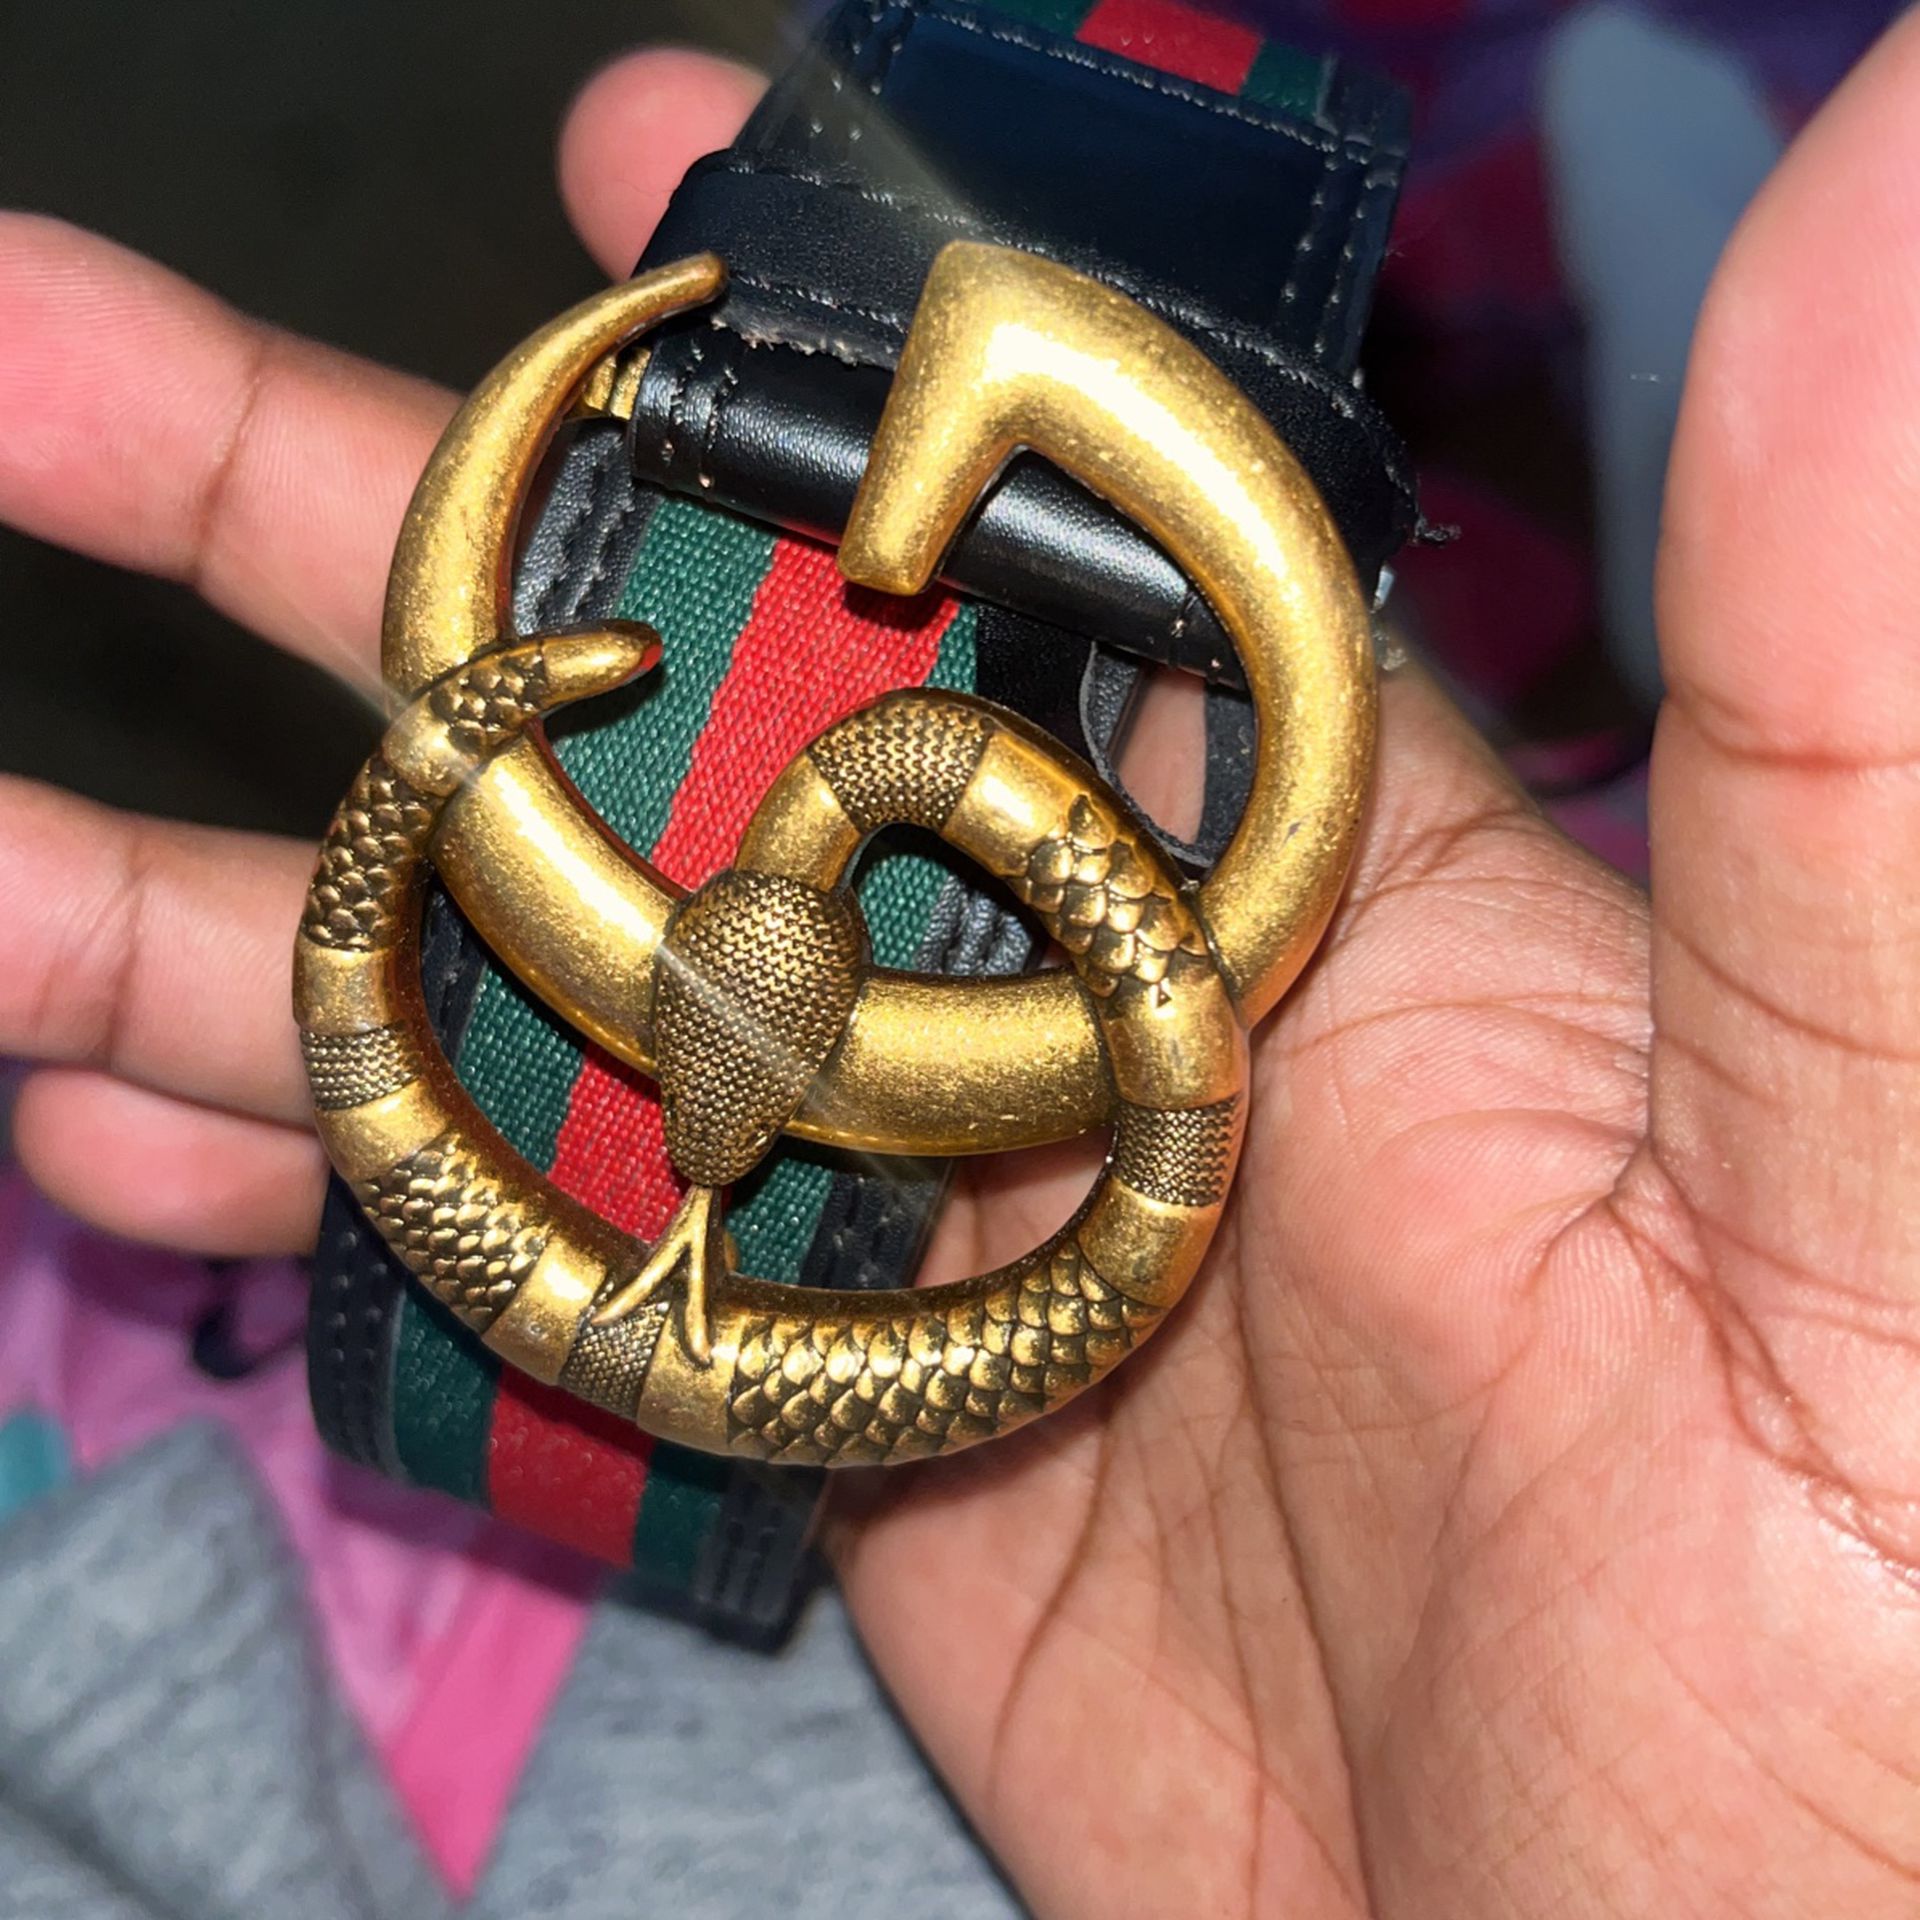 Gucci Gold Belts for Women for sale